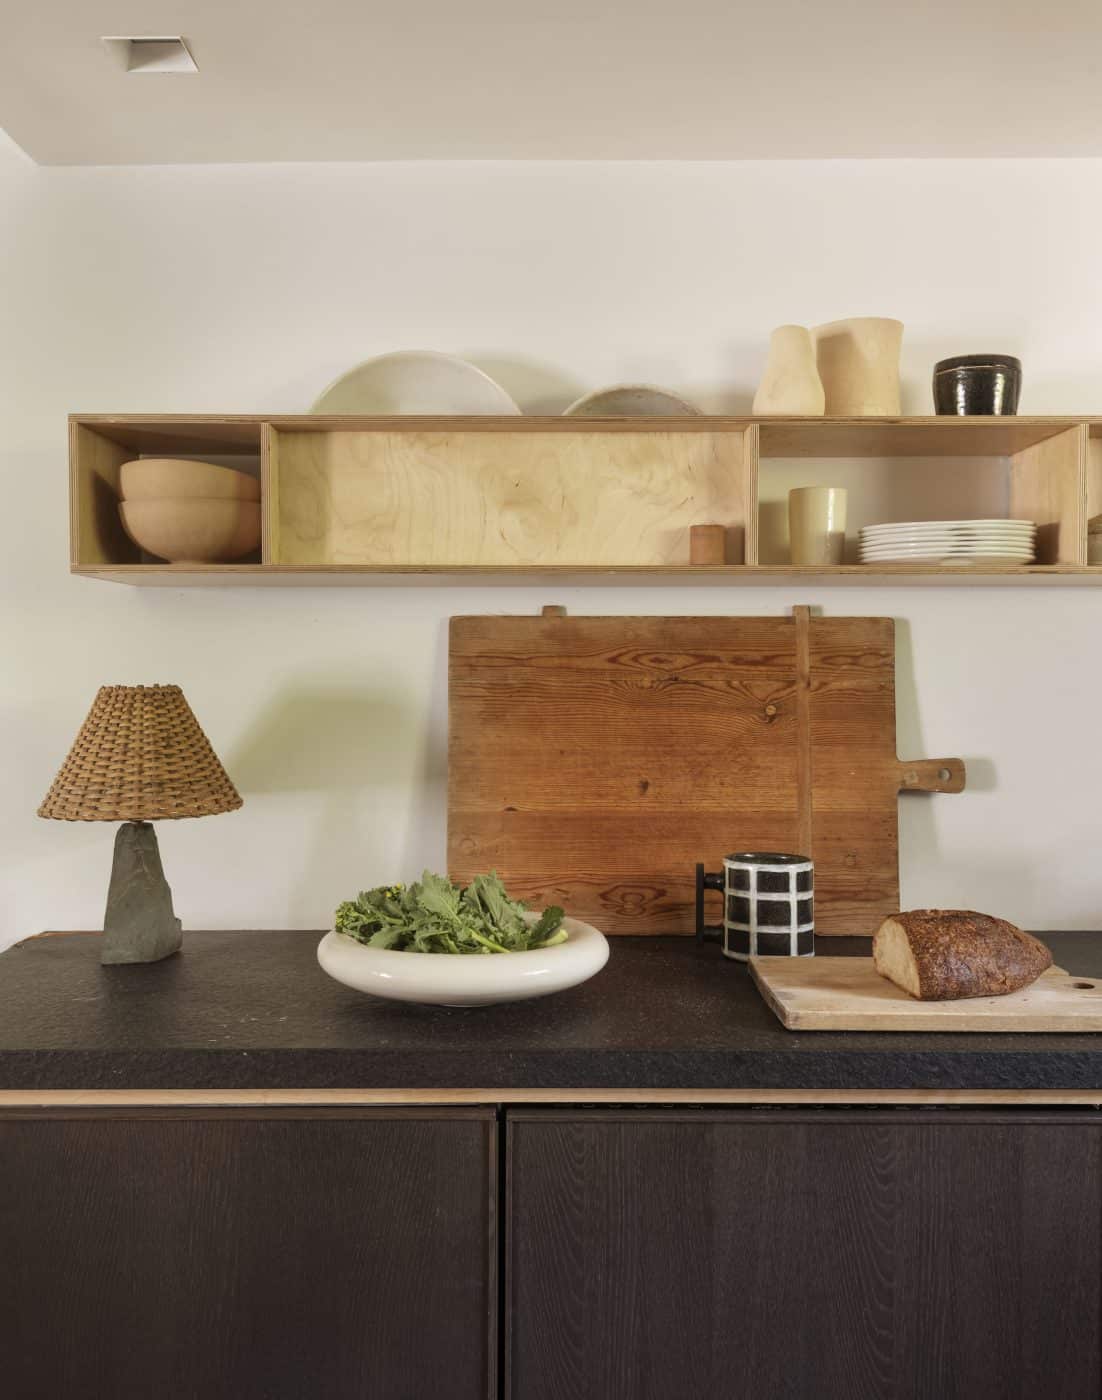 Andy Baraghani's countertop with vintage French lamp and wooden cutting board